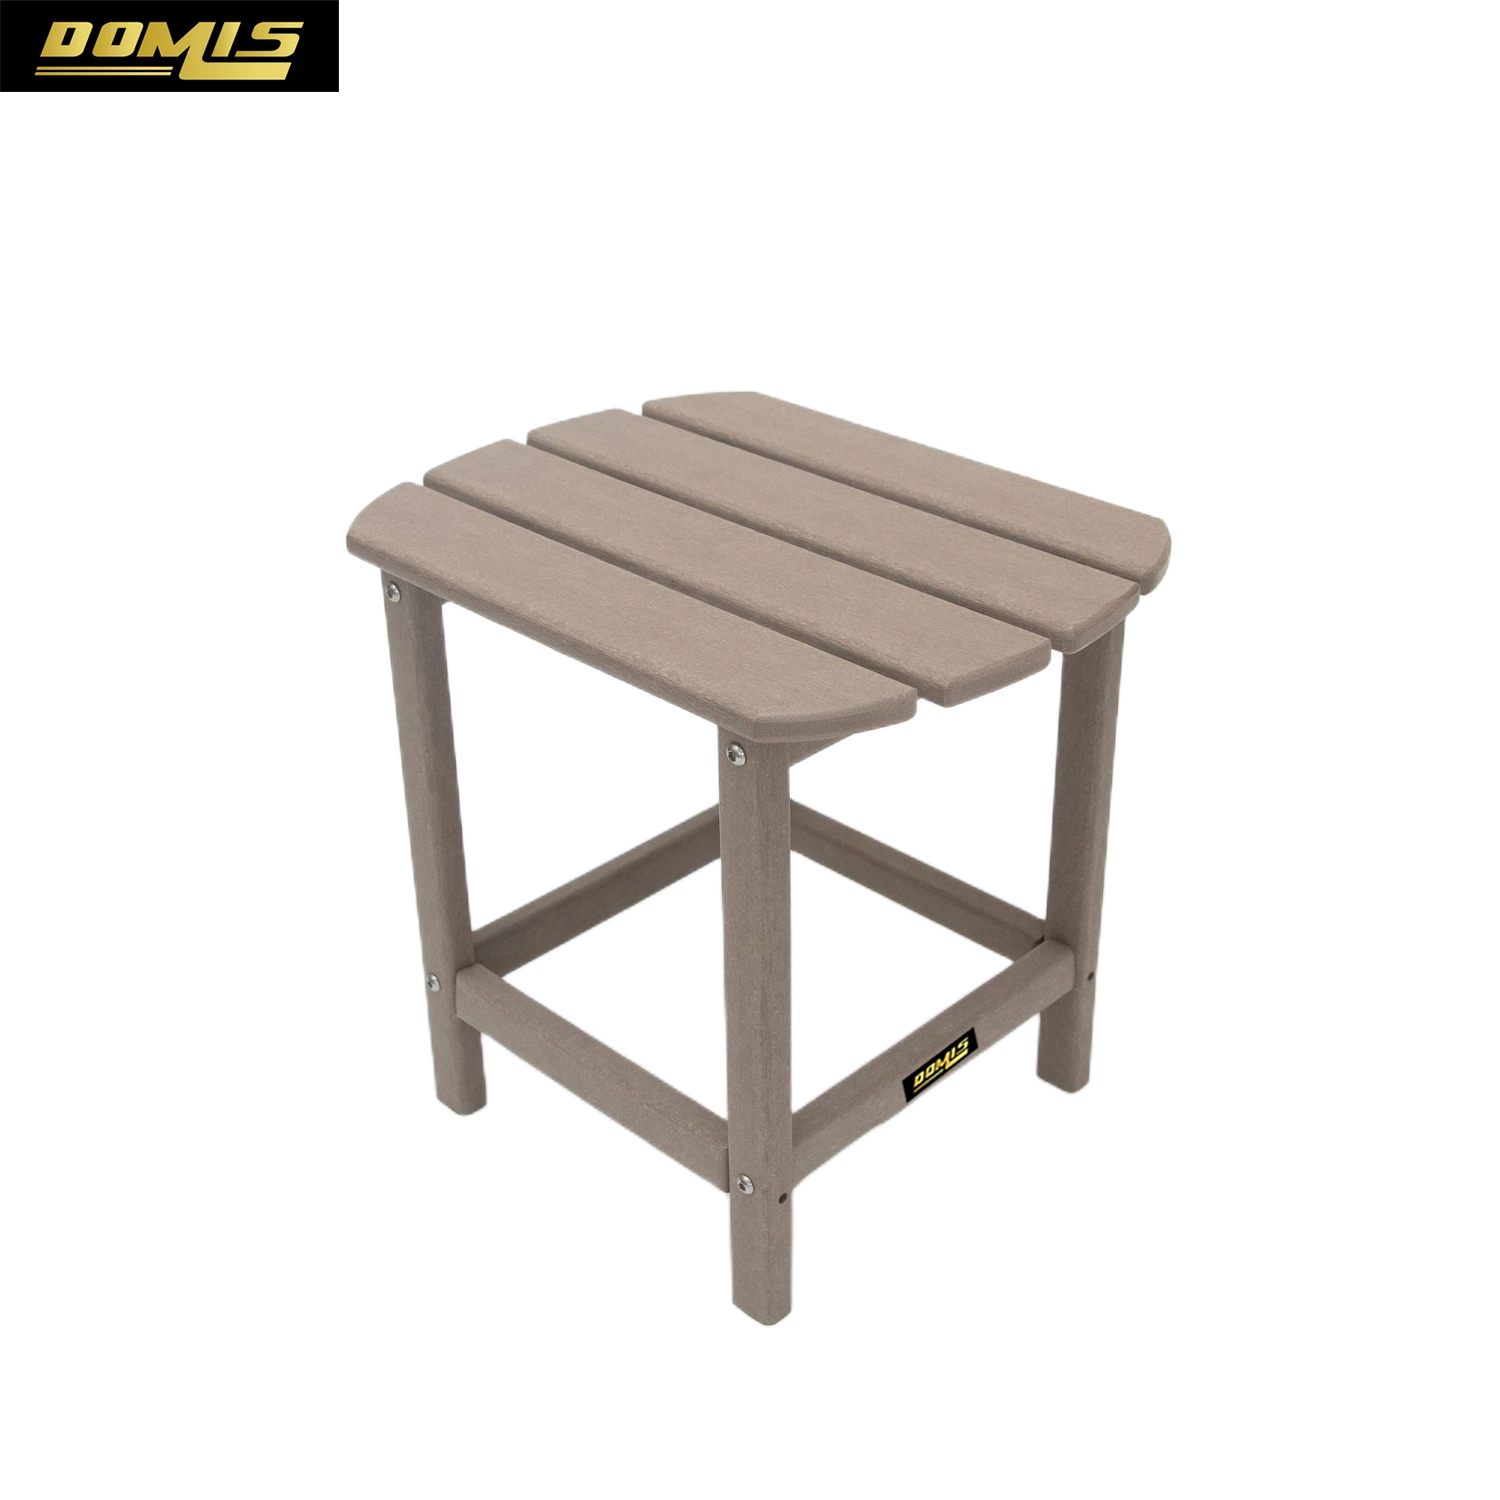 Easy Carrying Plastic Side Table for Outdoor Use